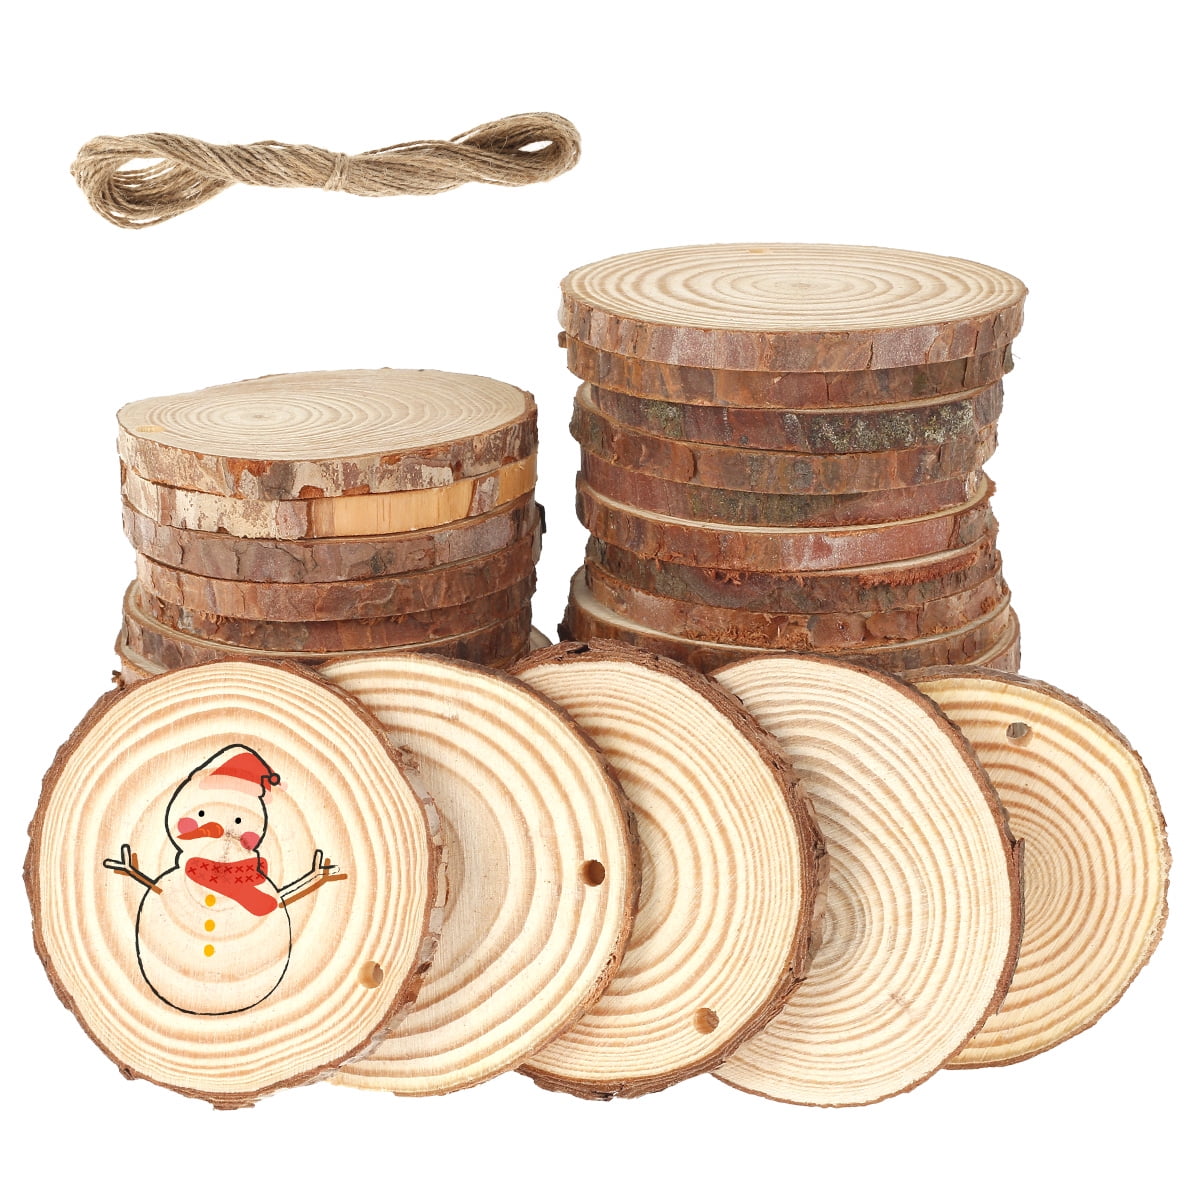 William Craft Unfinished Natural Wood Slices 12 Pcs 3.5-4 inch Craft Wood  kit Circles Crafts Christmas Ornaments DIY Crafts with Bark for Crafts  Rustic Wedding Decoration (3.5-4inch) 12 Pcs 3.5-4inch